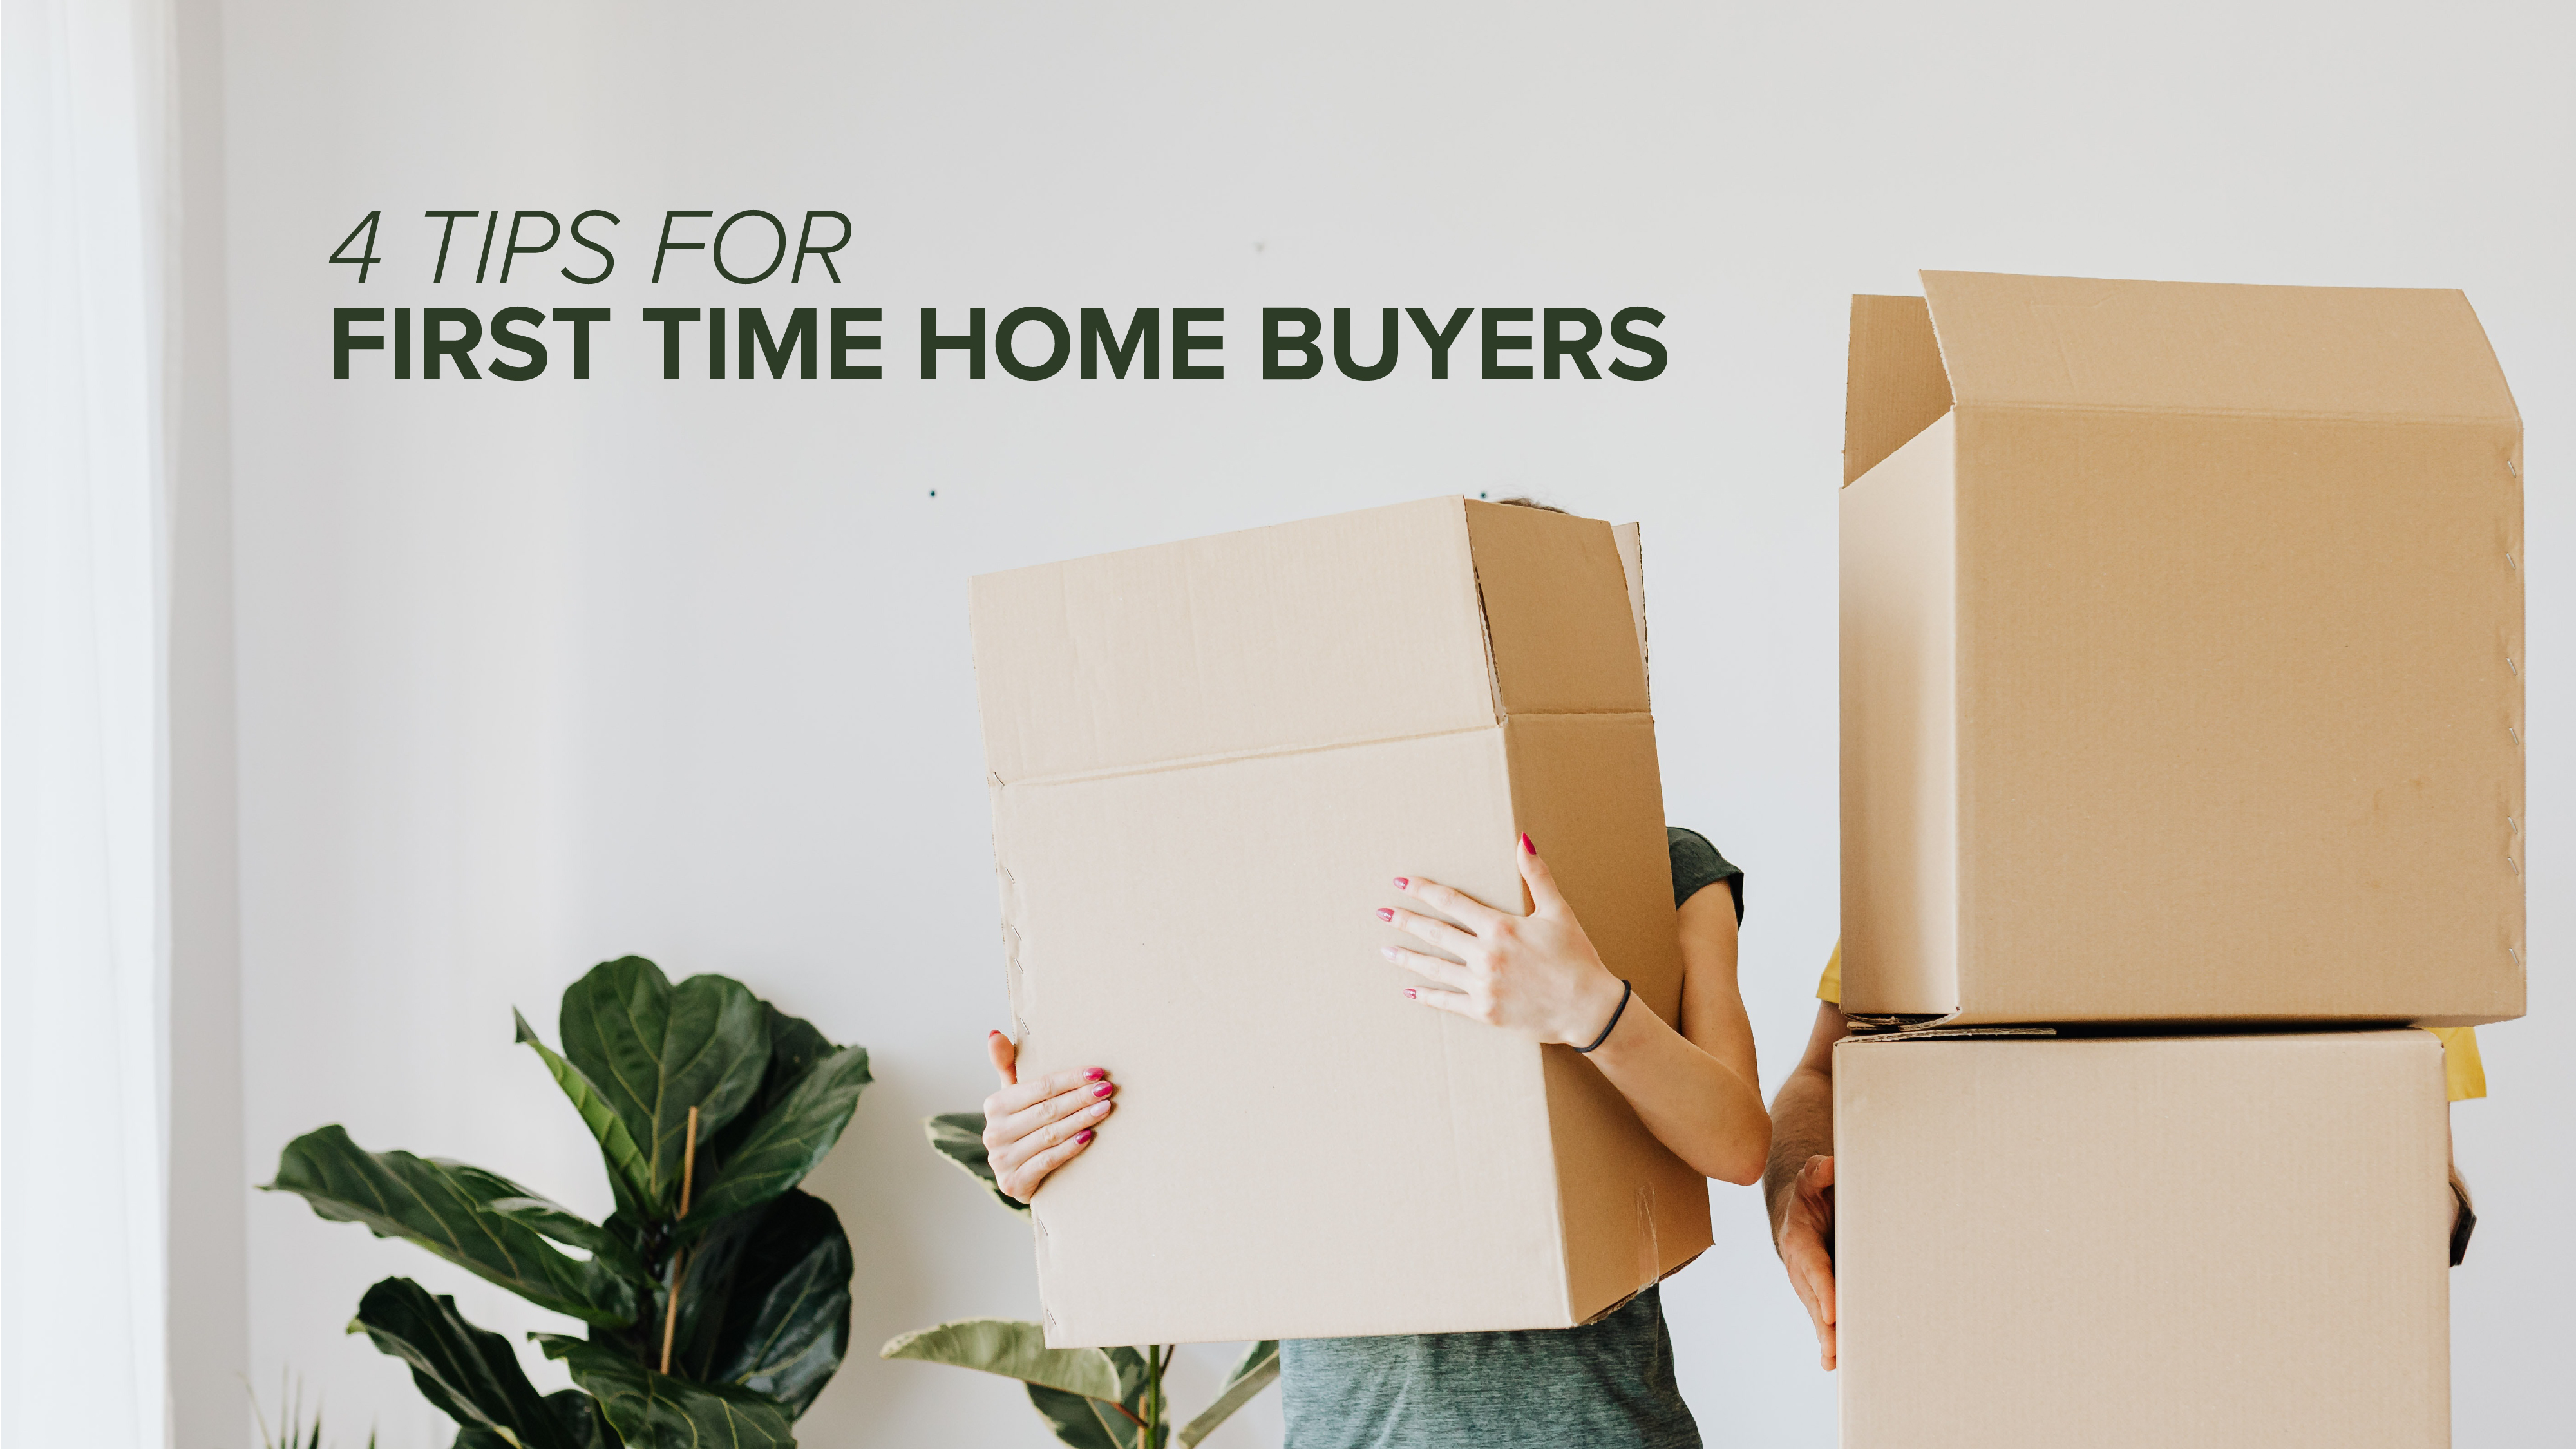 4 Tips for First Time Home Buyers